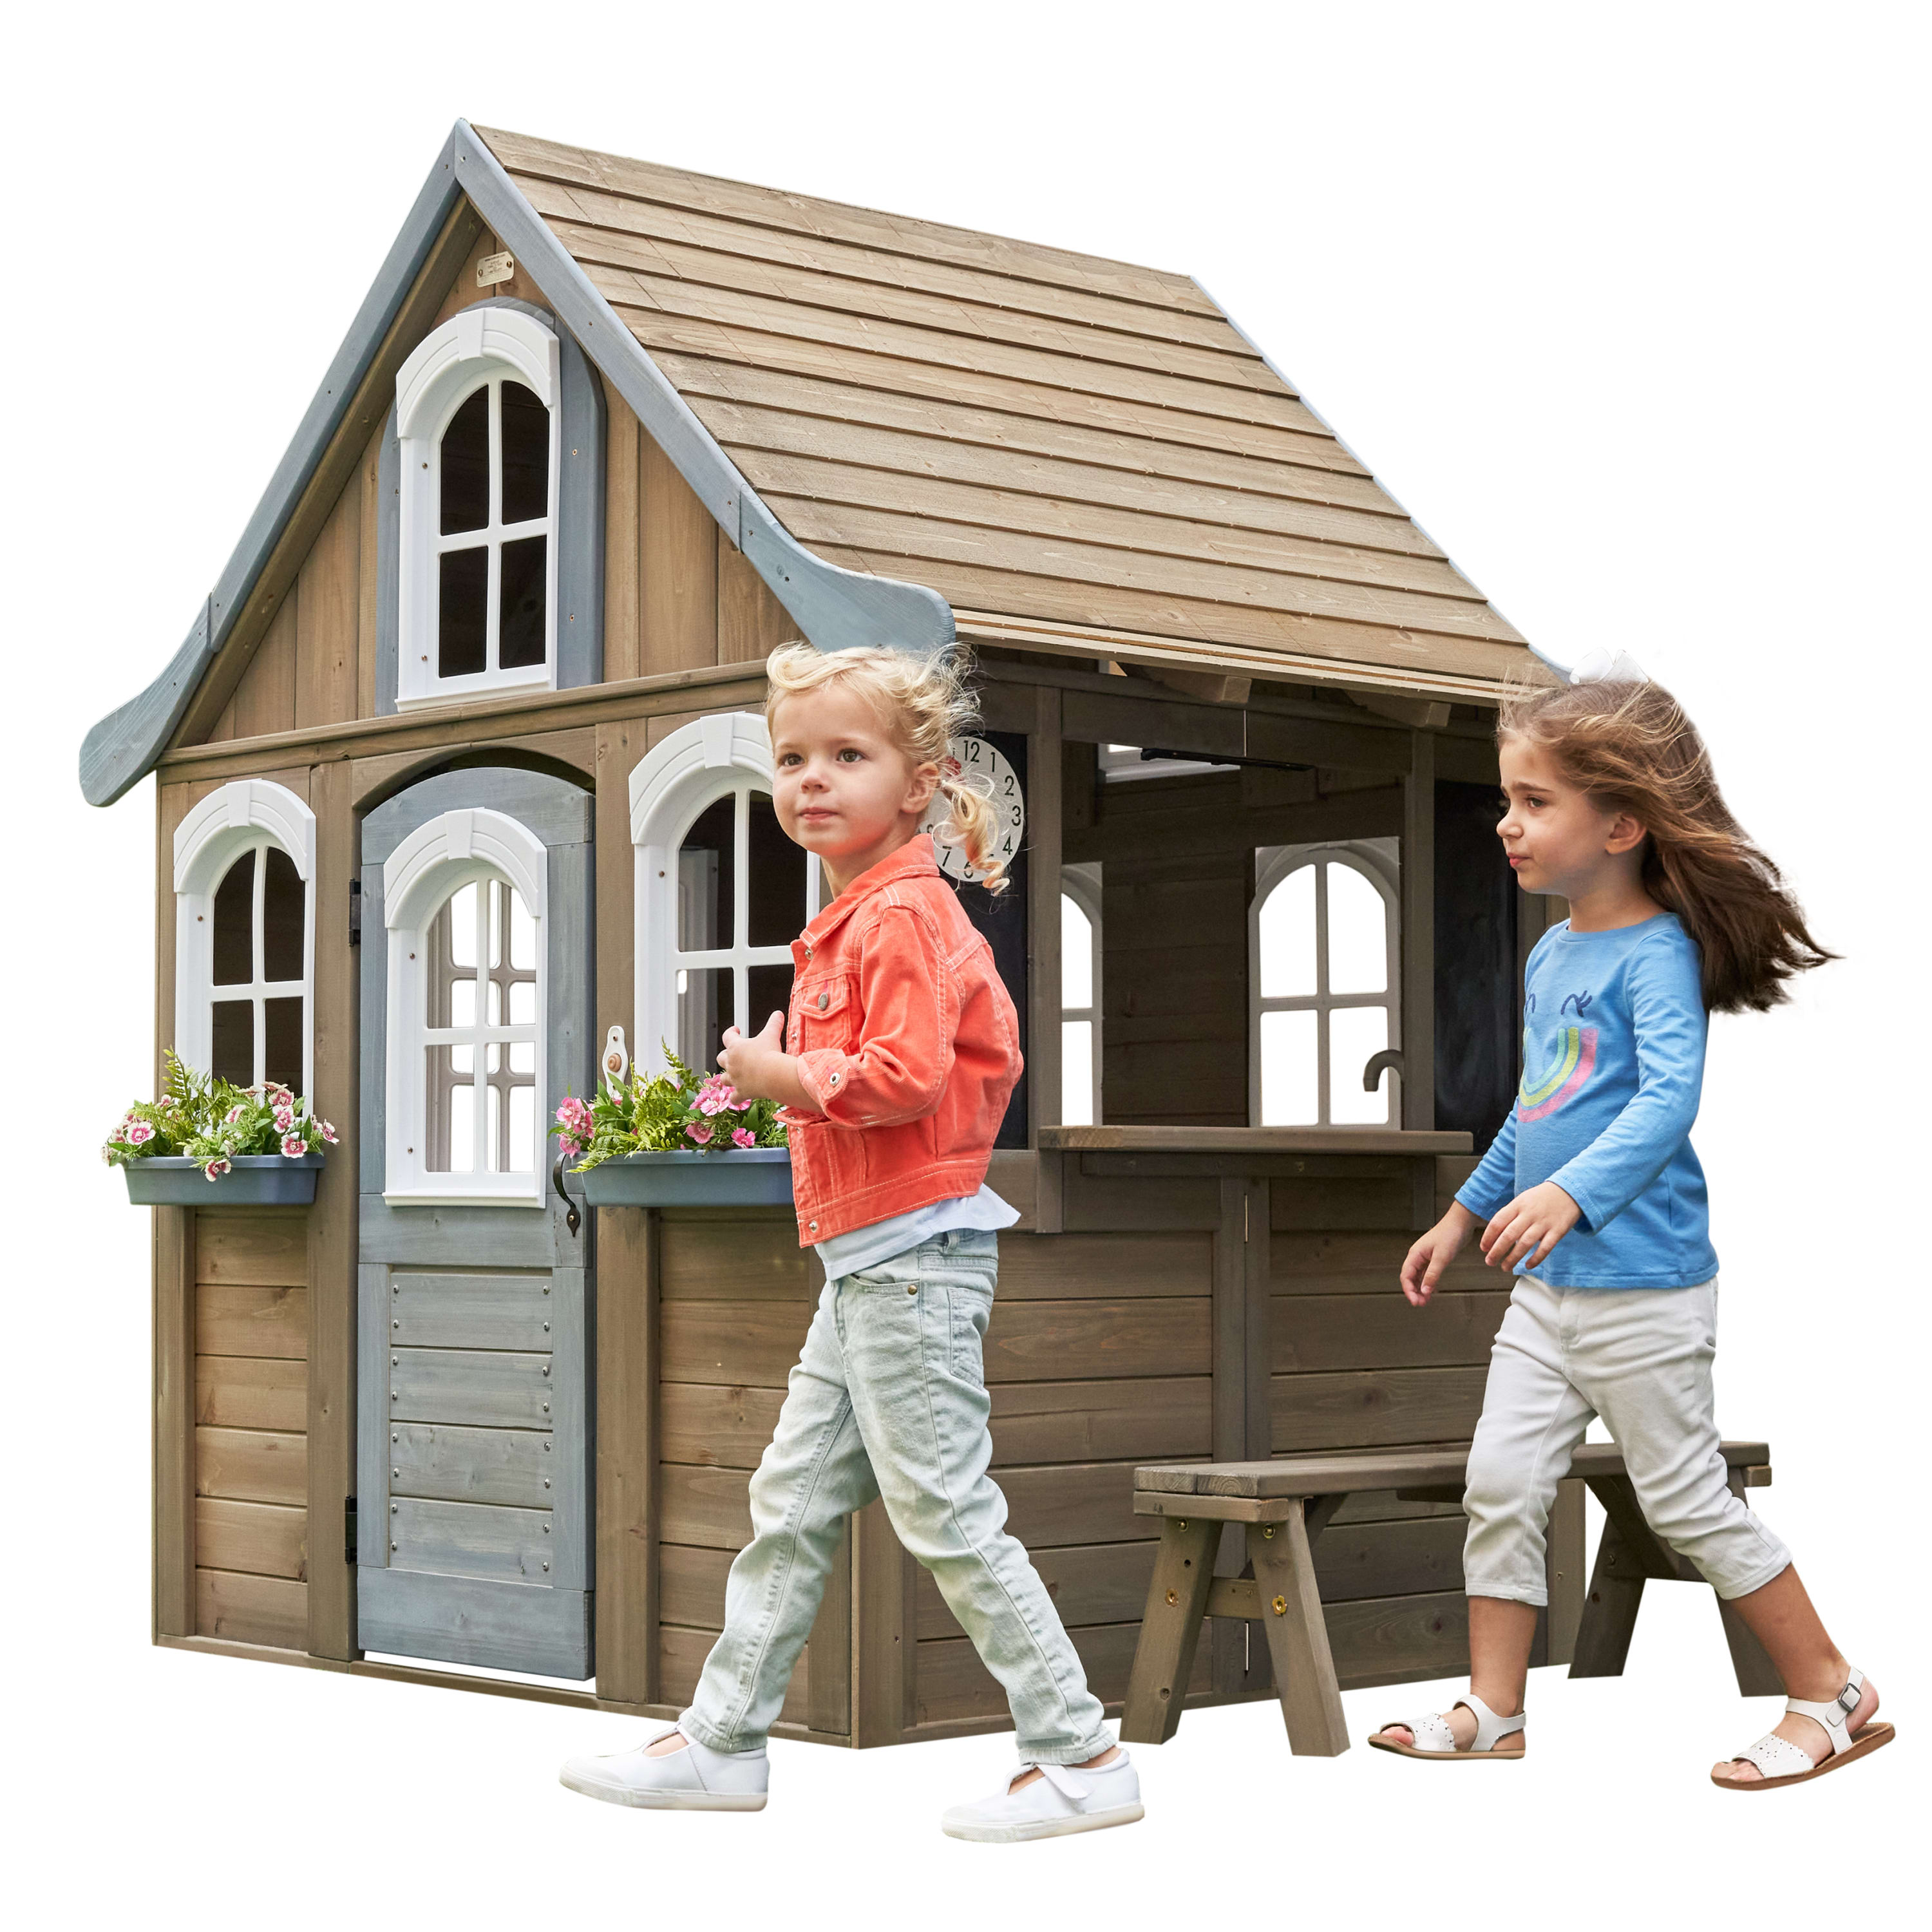 KidKraft Forestview II Wooden Outdoor Playhouse with Ringing Doorbell, Bench and Kitchen - image 1 of 15